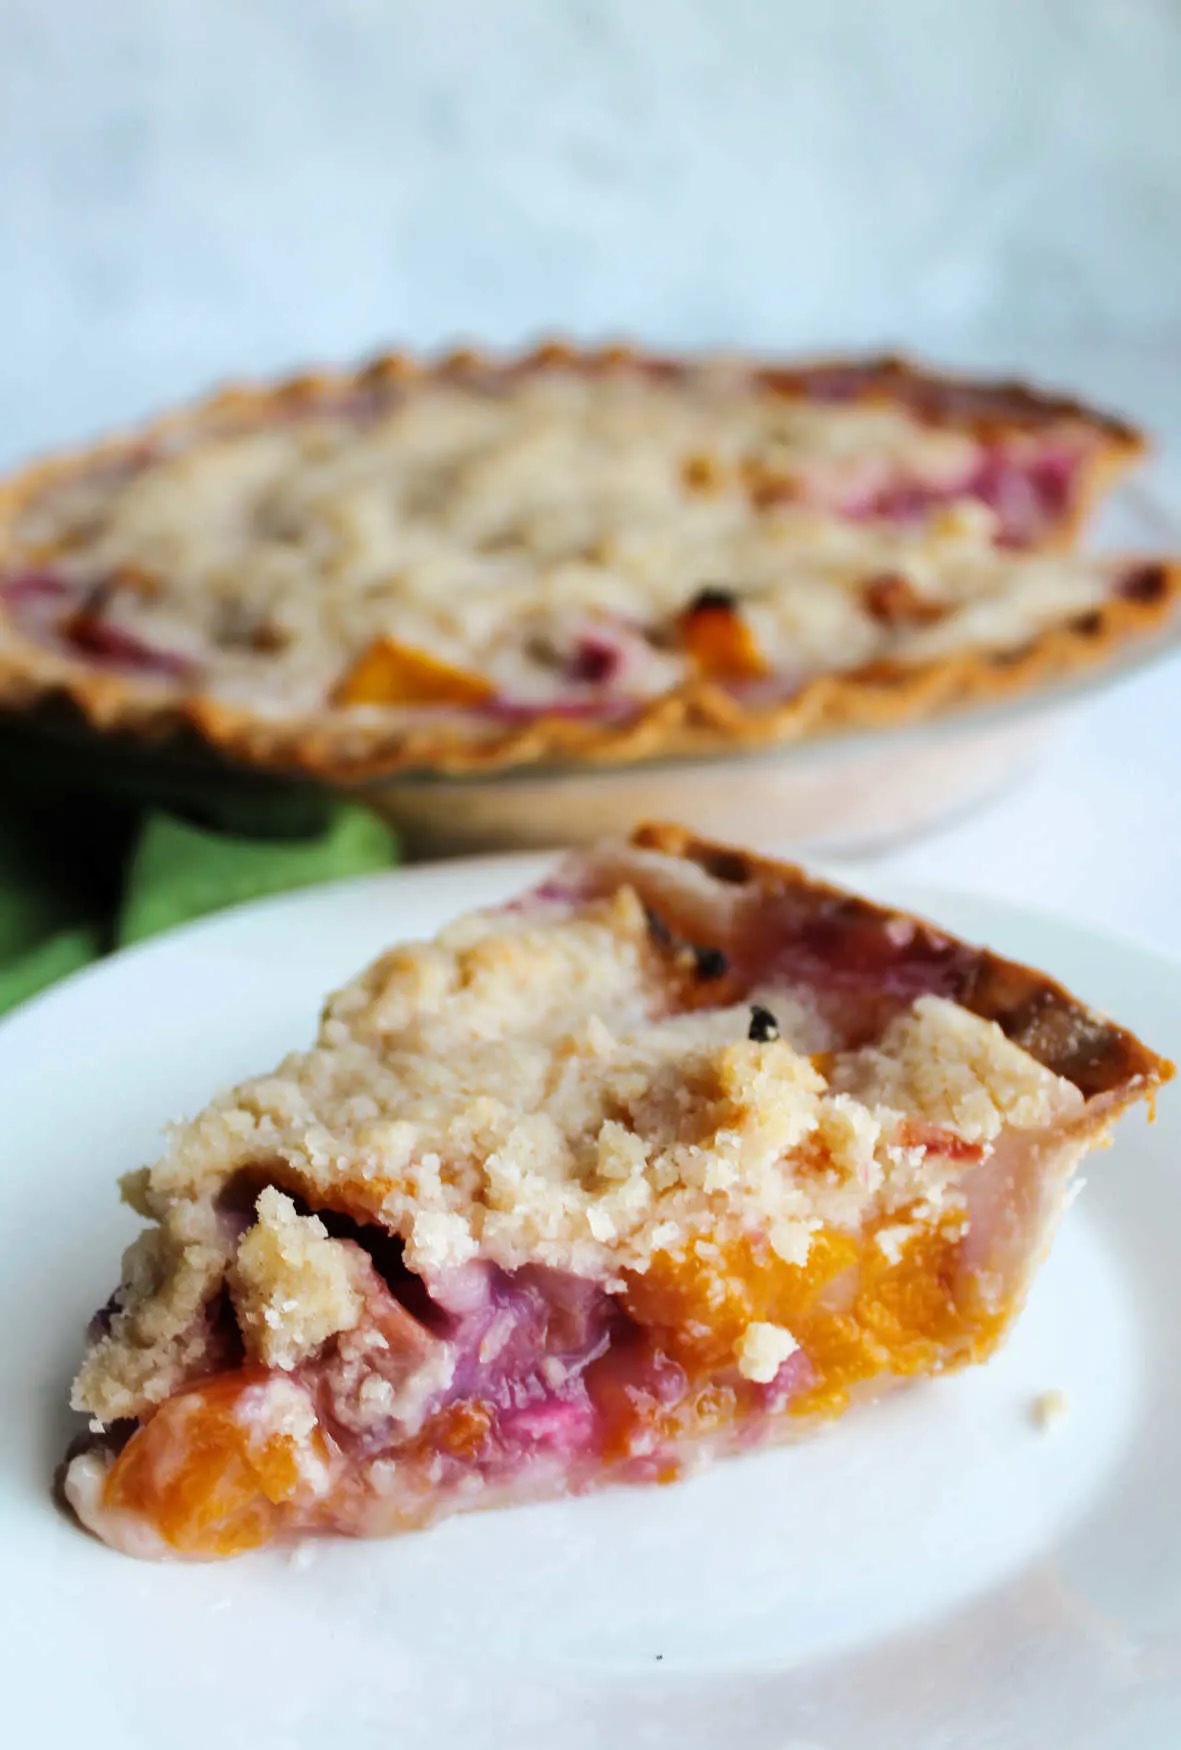 Slice of crumb topped peach rhubarb pie in front of remaining pie.